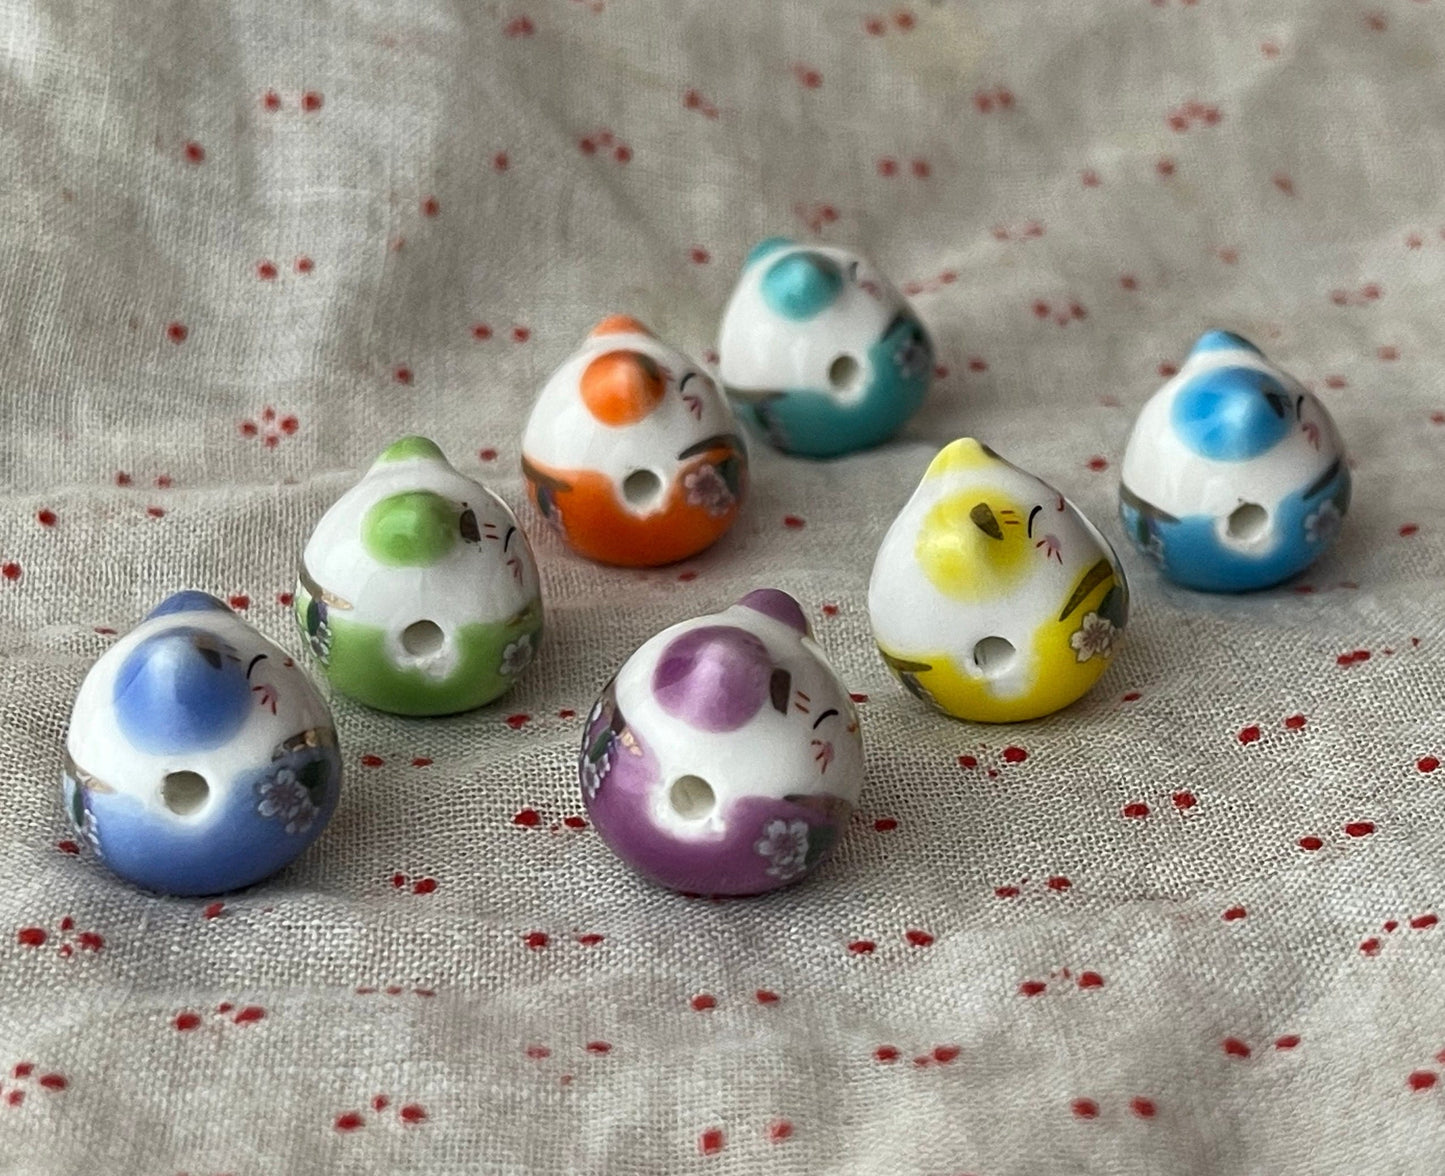 Cat With Flower Printed Porcelain Beads - handmade-single color lot of 4 or multicolor set of 7-blue, green, teal, orange, purple, yellow